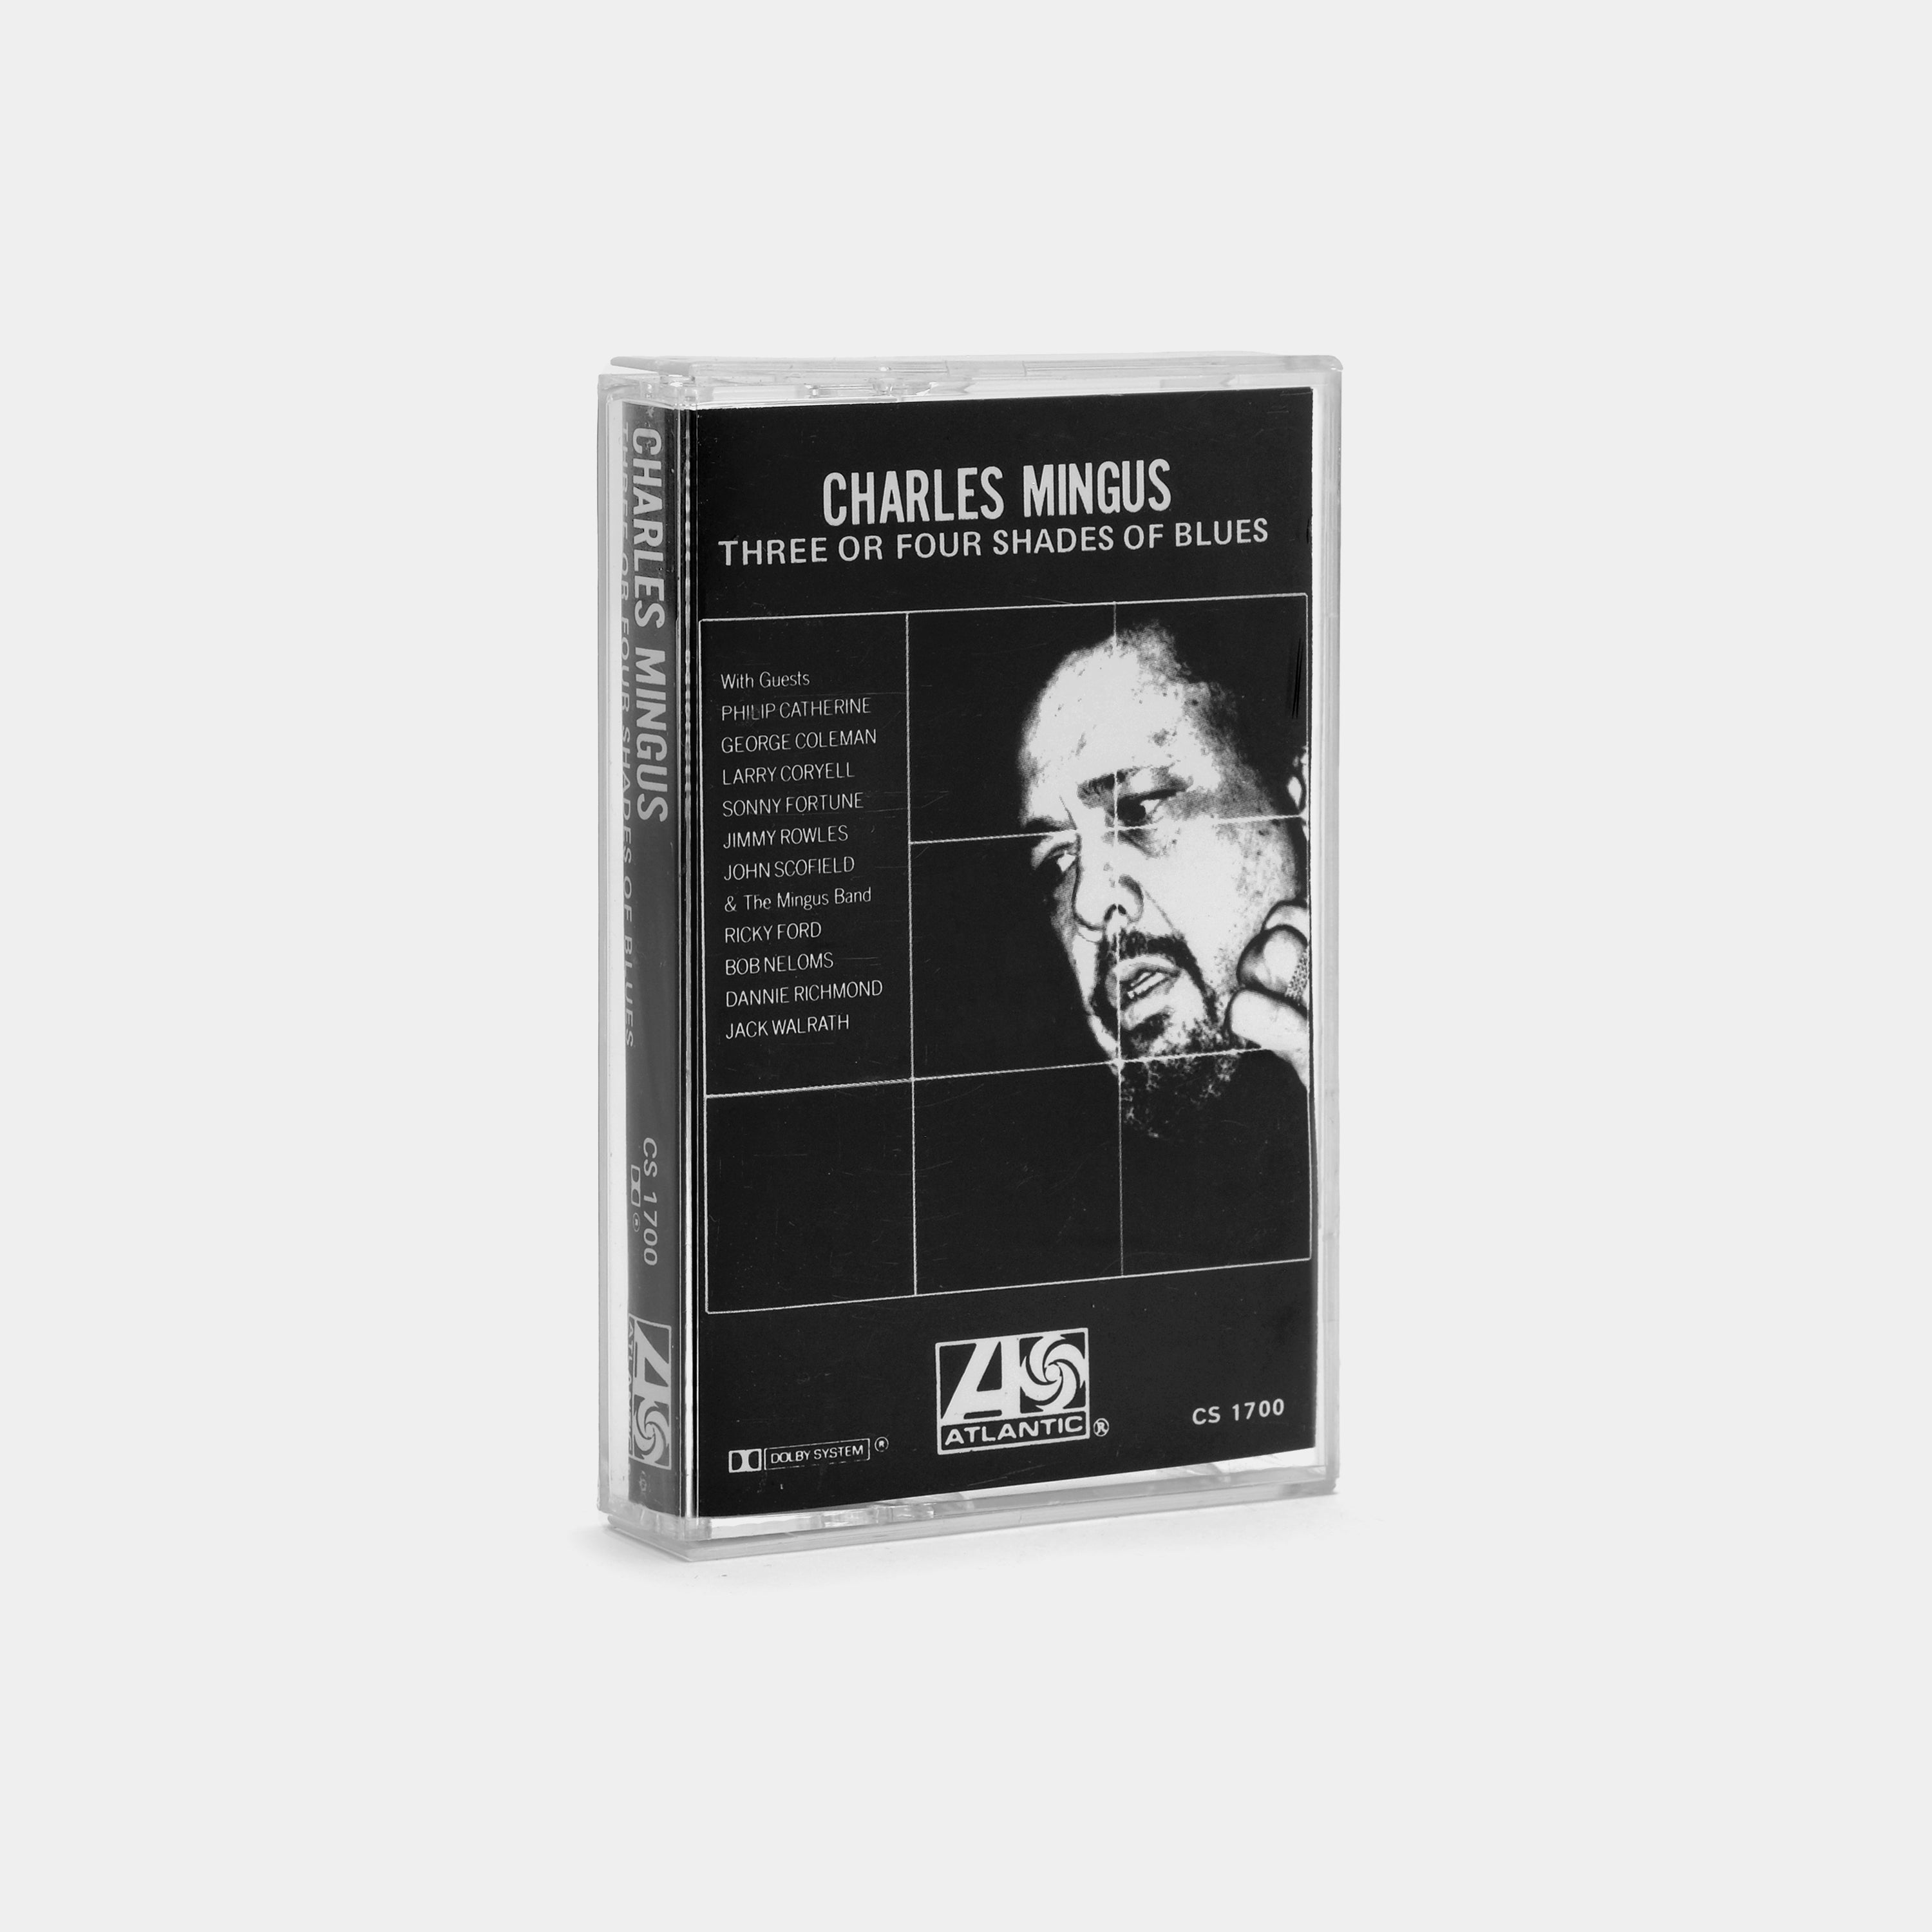 Charles Mingus - Three Or Four Shades Of Blues Cassette Tape